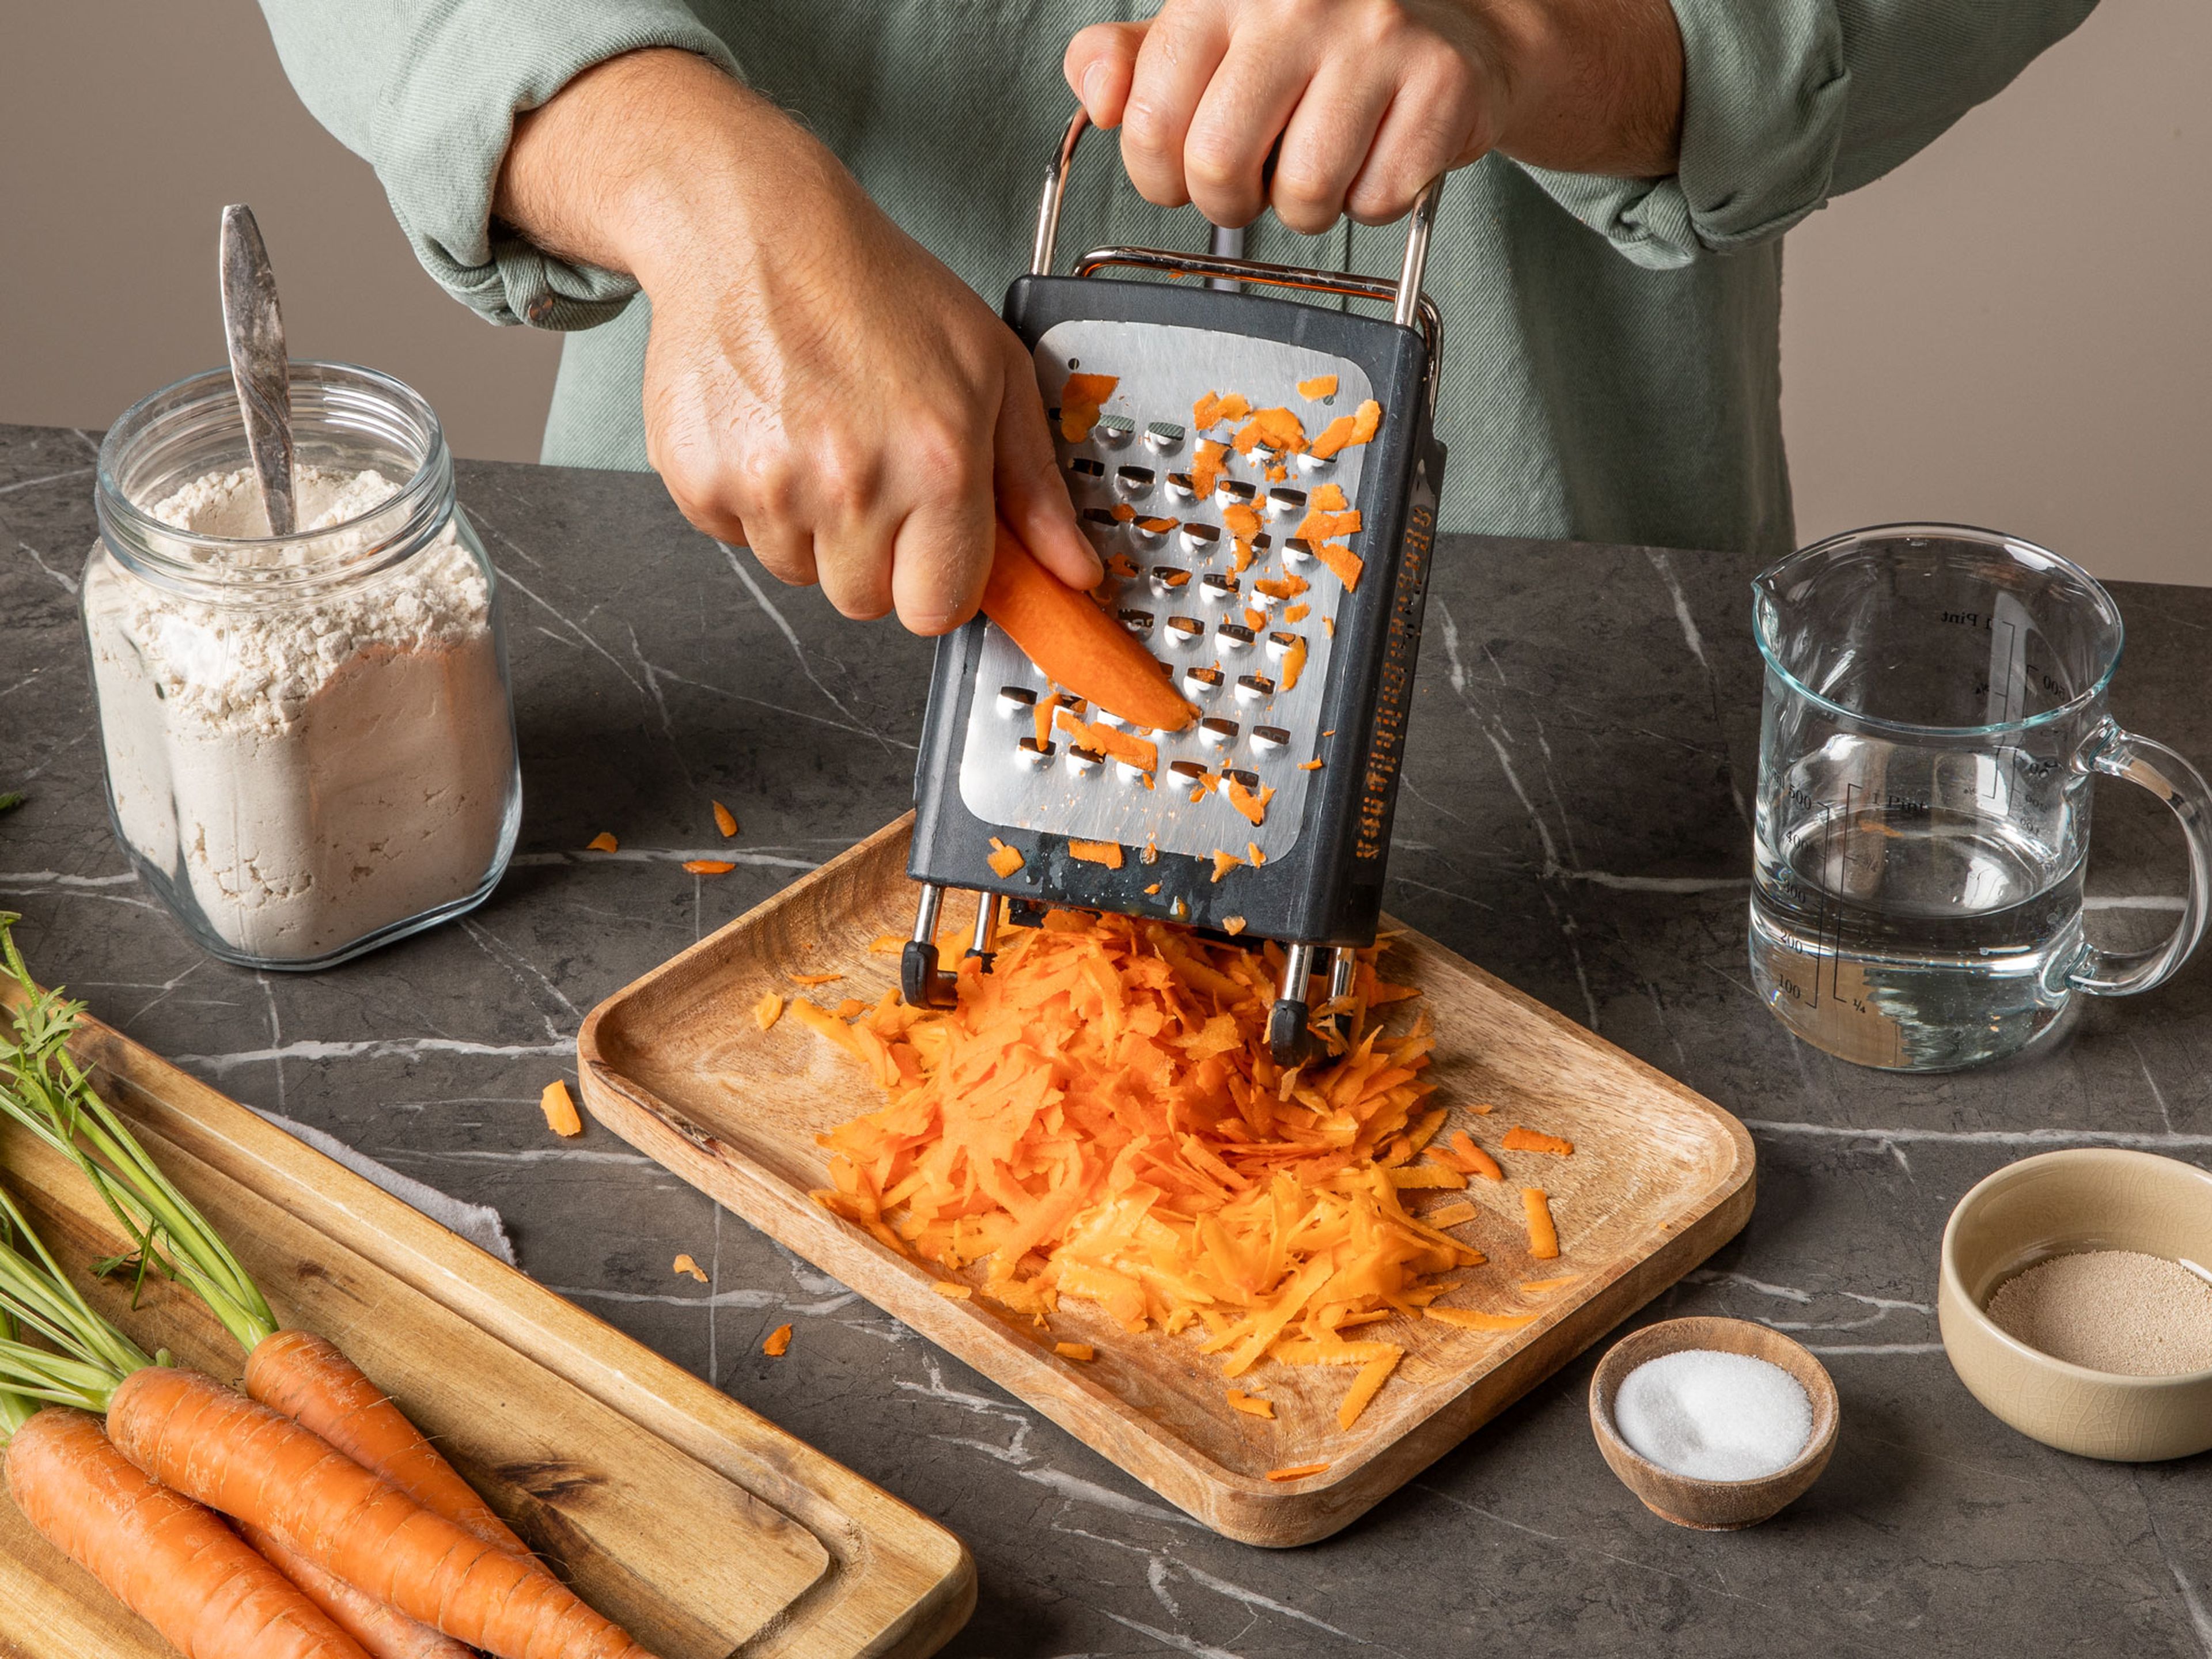 Peel and shred the carrots using a box grater and set aside. In a small bowl, whisk together yeast and sugar in the water and set aside for approx. 10 min.